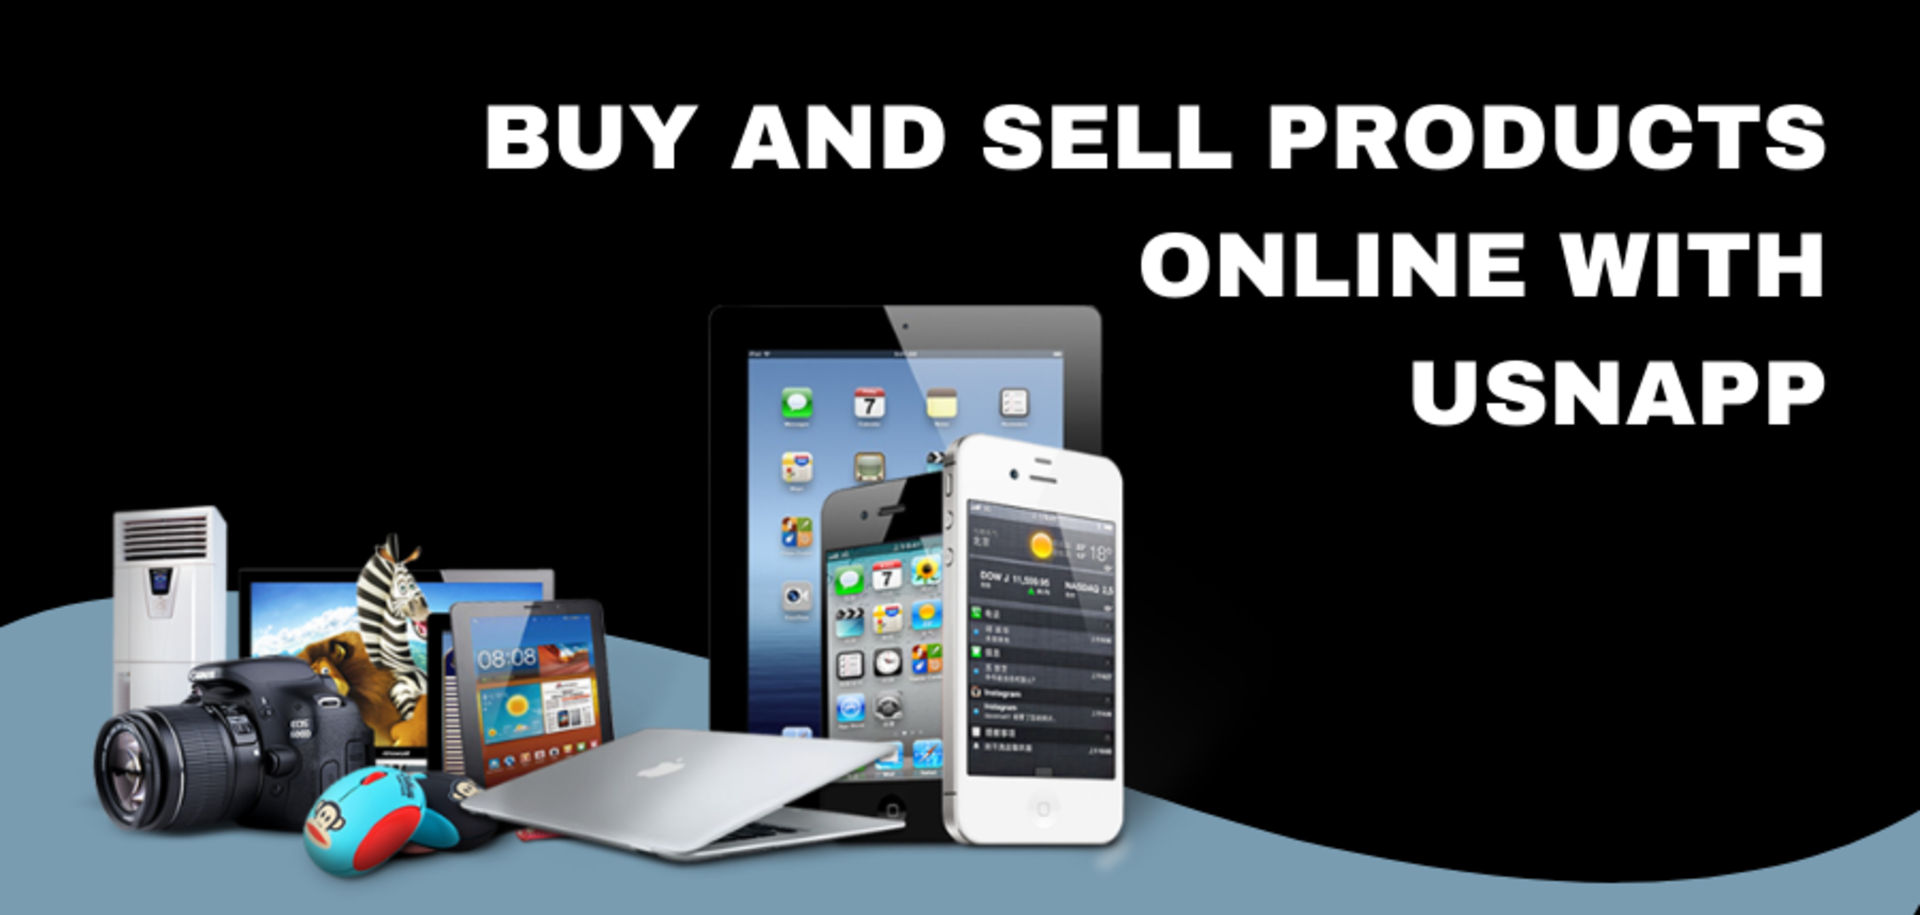 How to buy and sell products online with usnapp | usnapp